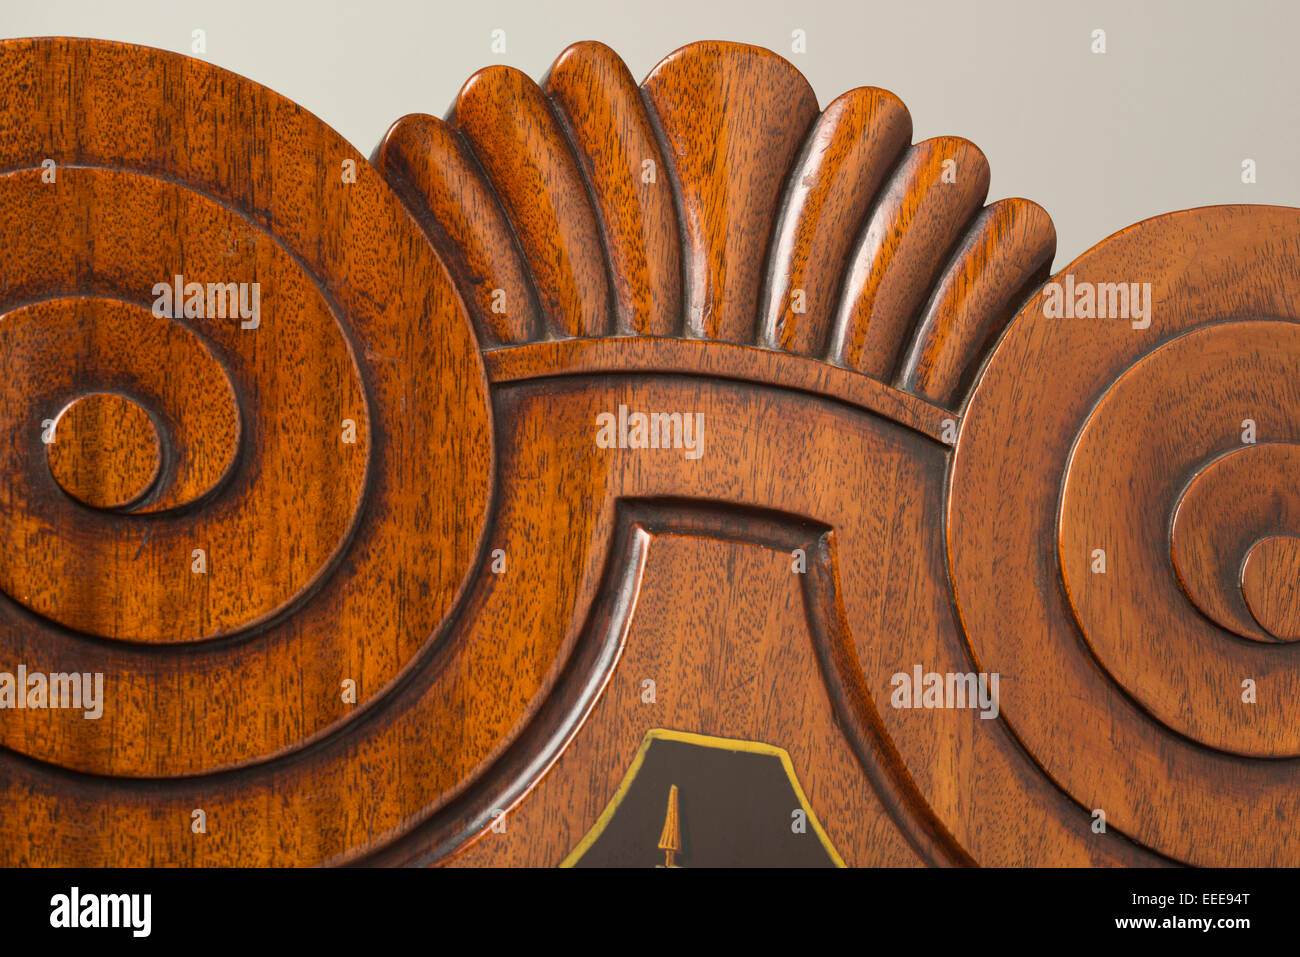 Curled swirl or spiral motifs carved into mahogany antique wooden chair with scalloped top. Stock Photo